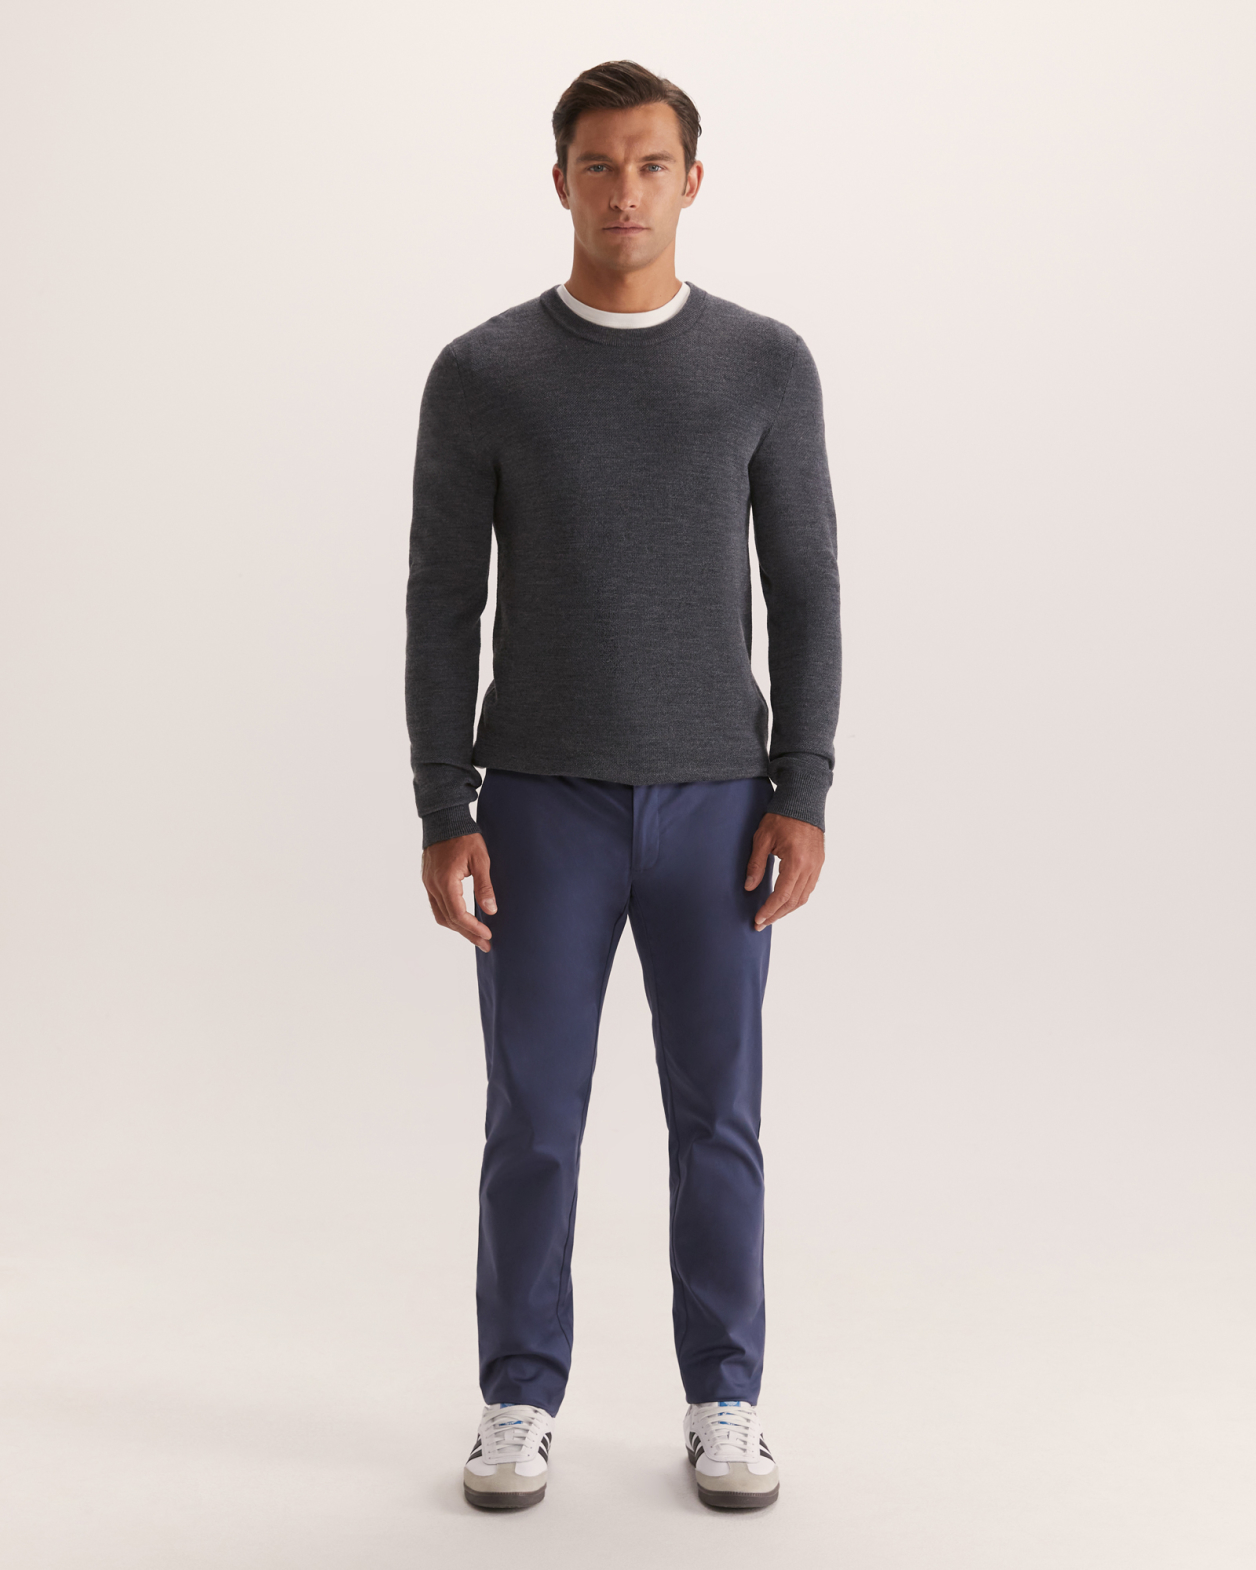 Samuel Wool Blend Crew Neck Knit in CHARCOAL